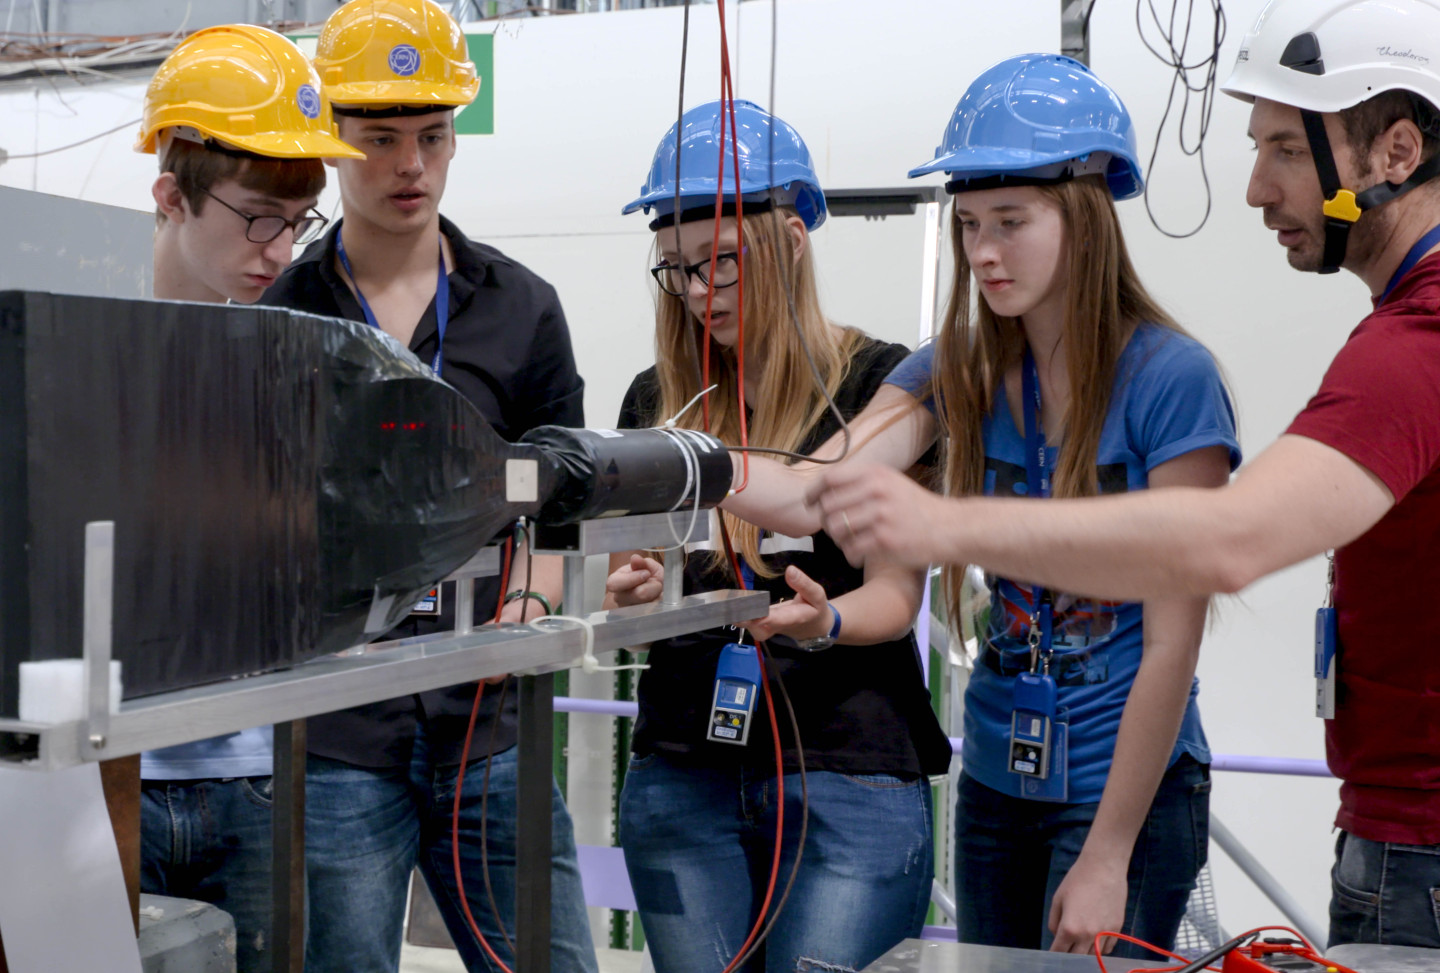 High-school physicists win chance to run experiments at CERN